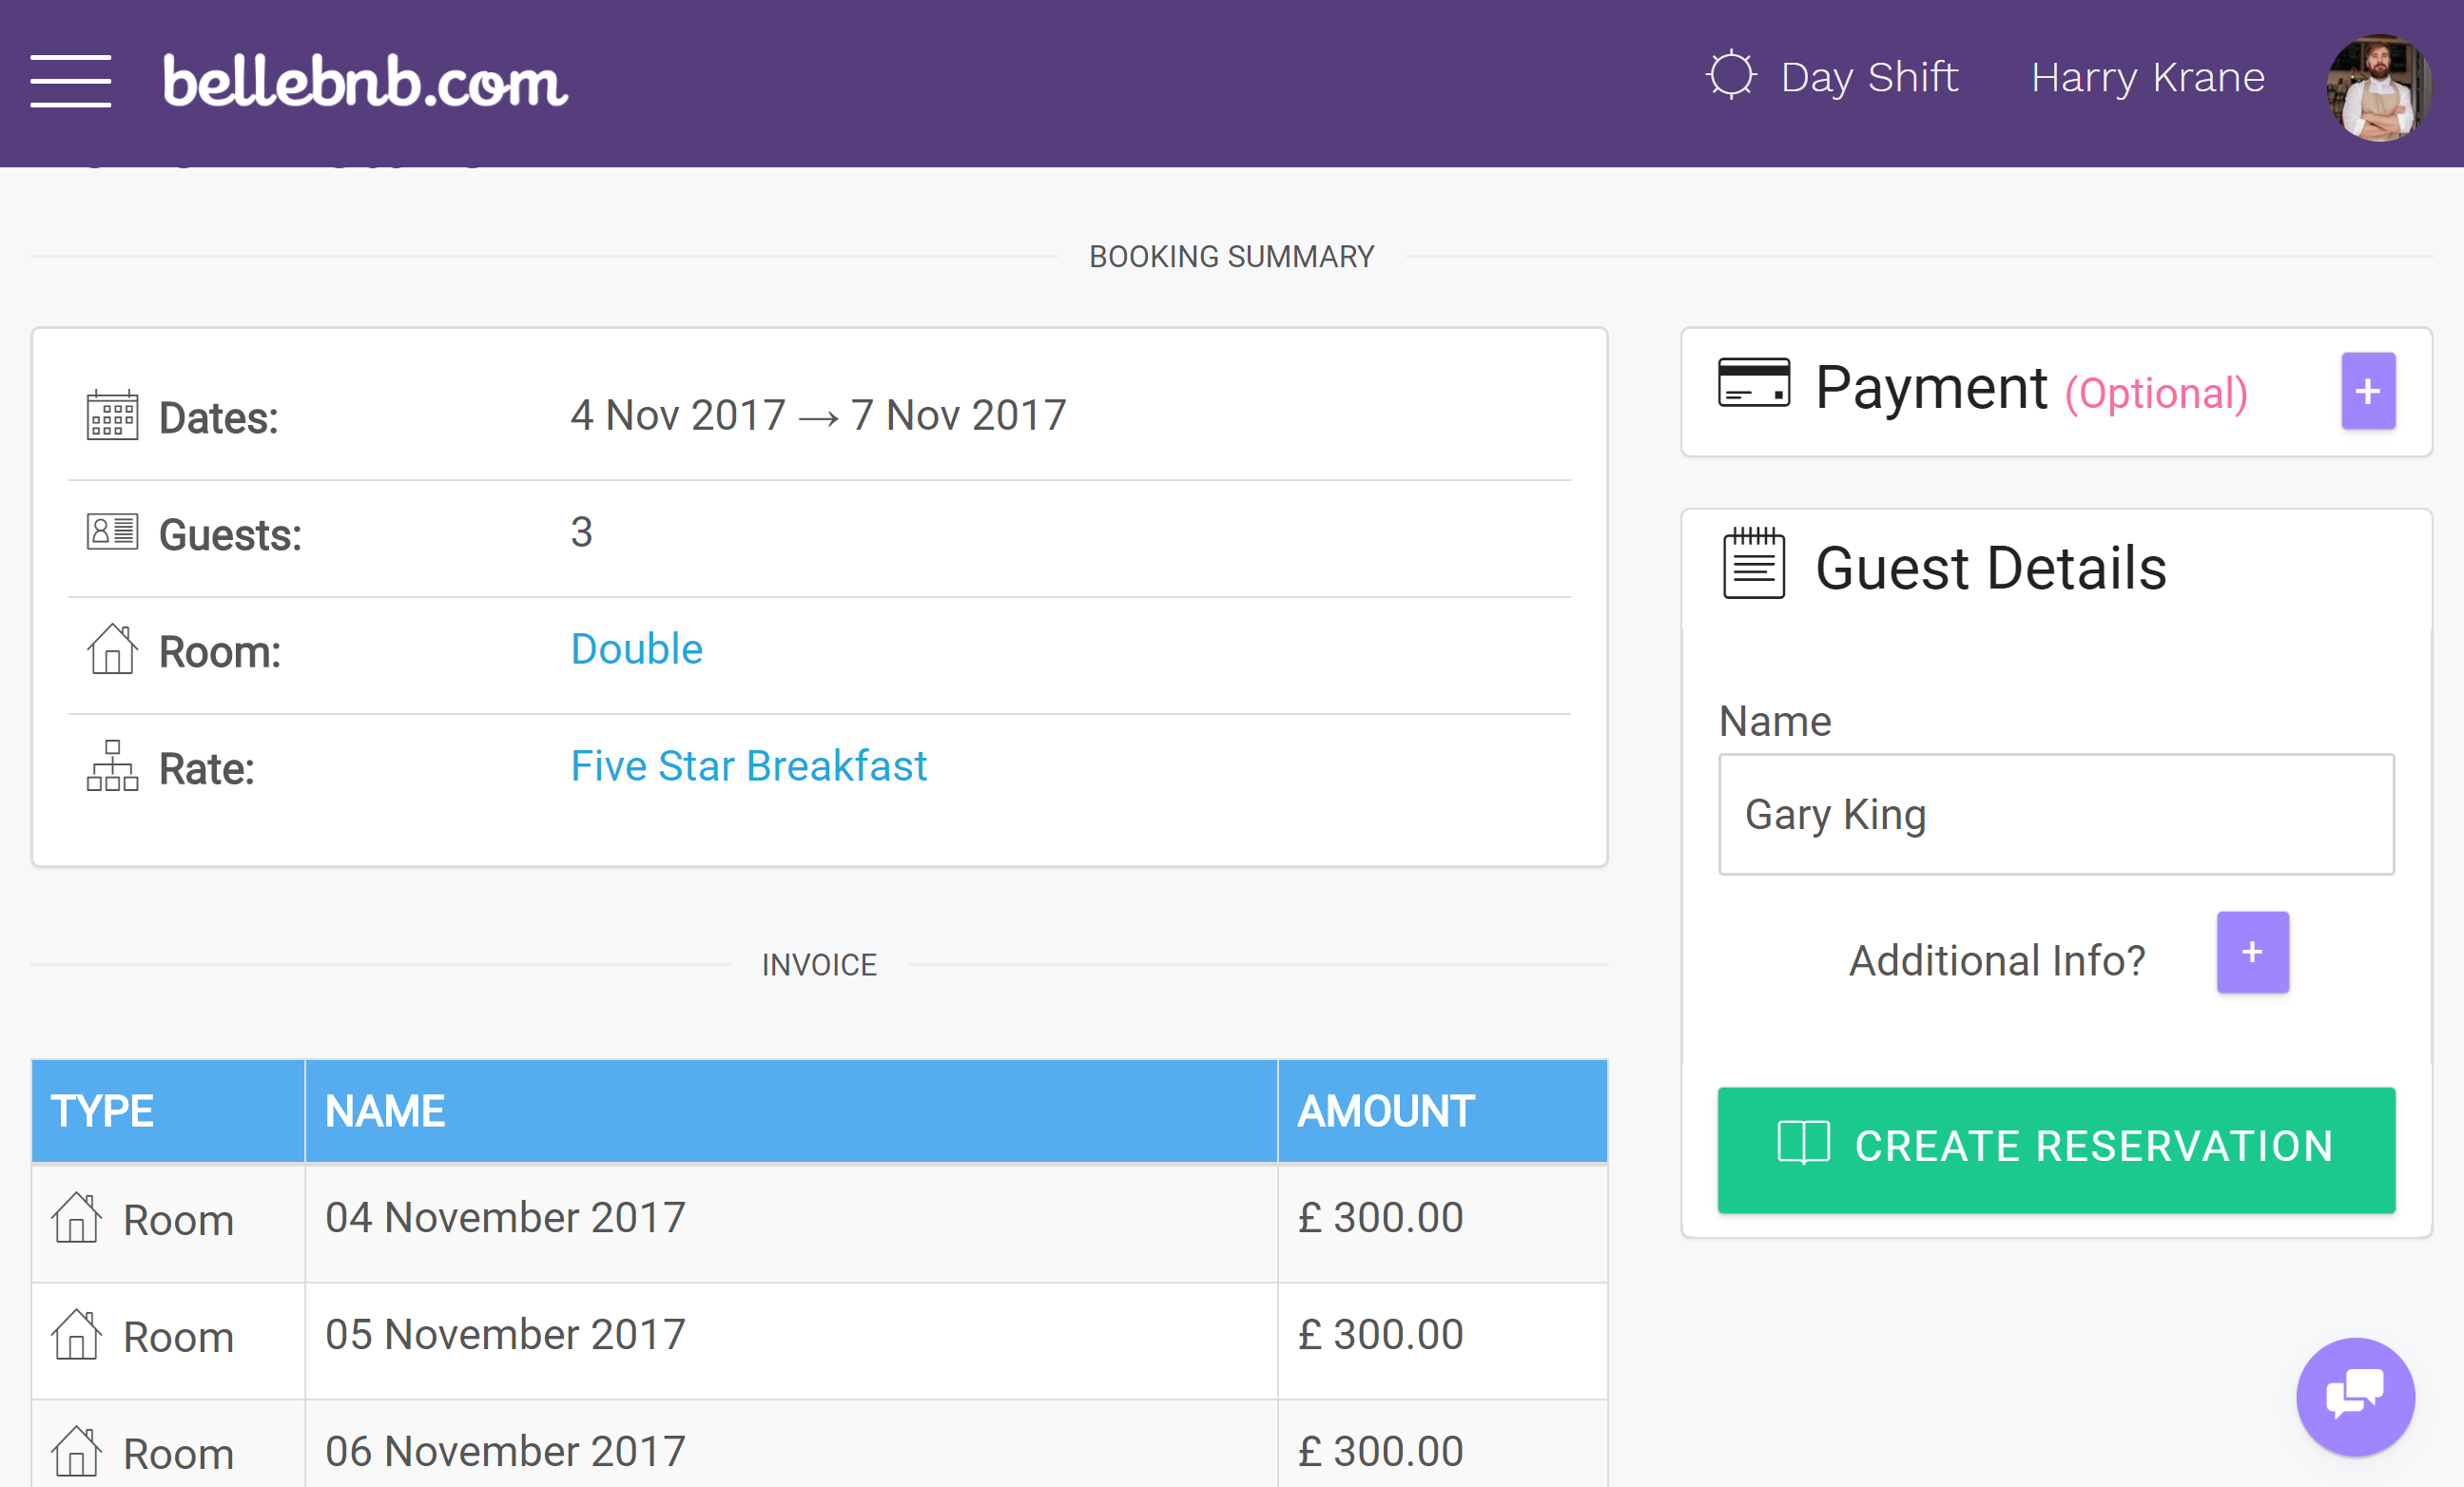 Hotel Front Desk & Reservation Drag-n-Drop Calendar to make it even easier to manage your hotel’s daily activity. You can now drag and resize to create and reschedule your hotel bookings and reservations.